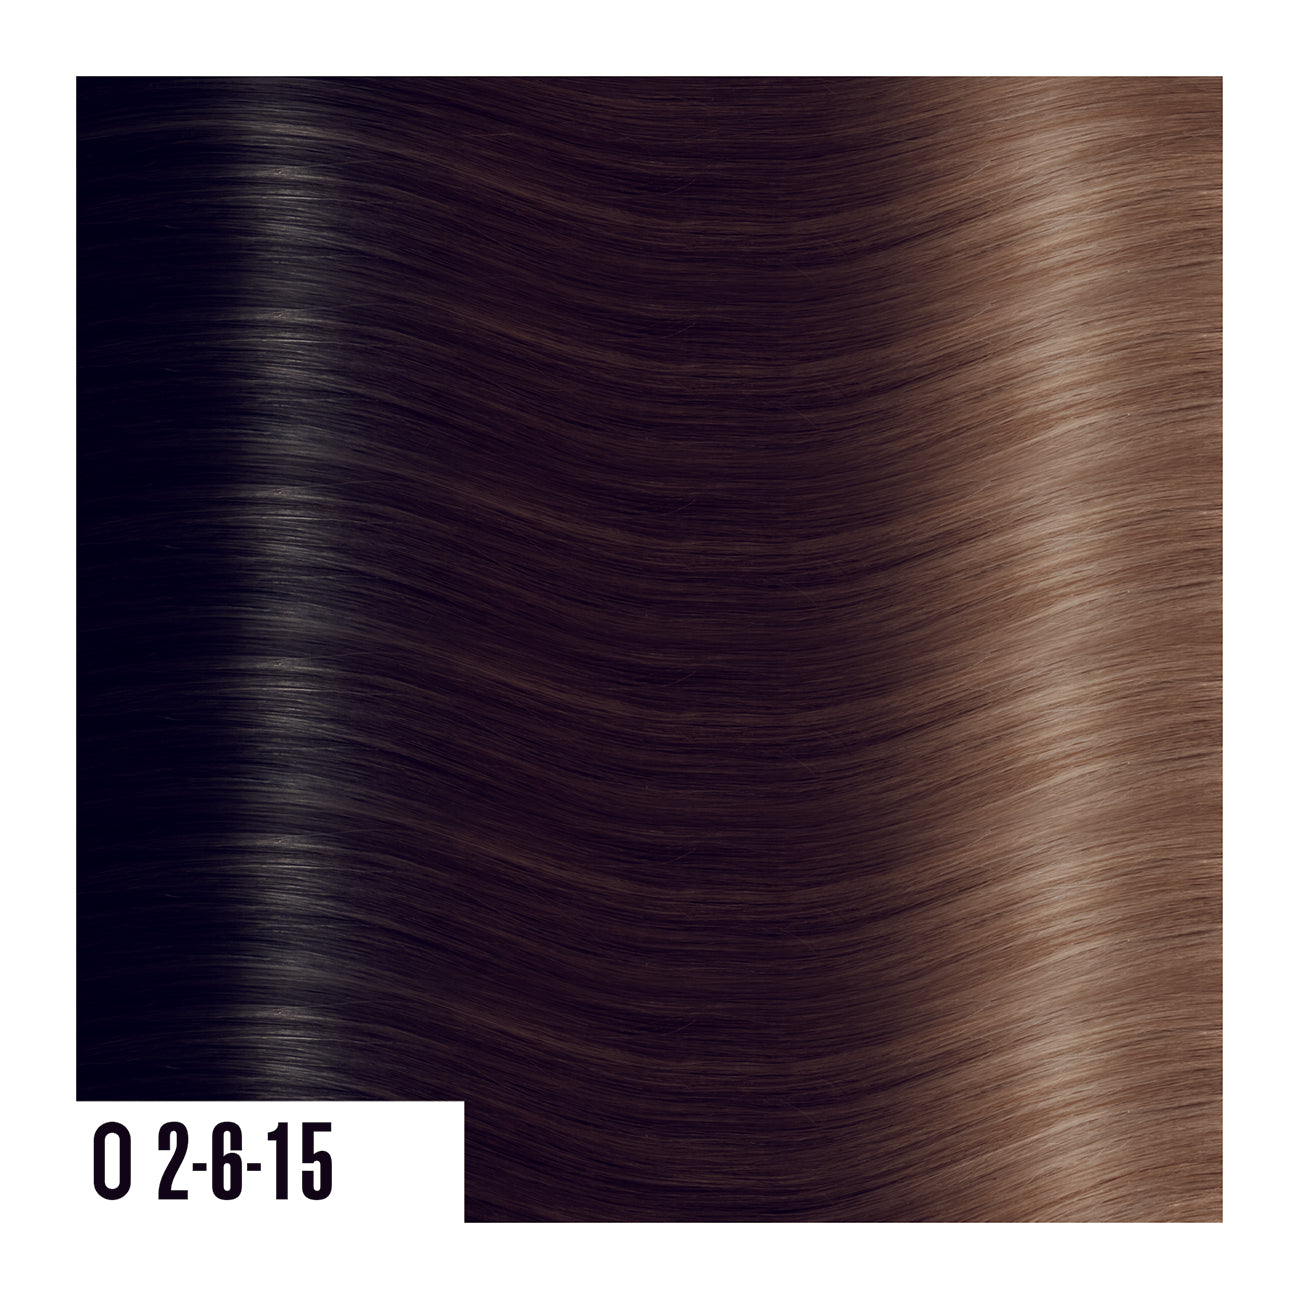 O2-6-15 - Prime Tape In Dark Brown Fade Into Medium Brown - Ombre colors are a beautiful gradual blend of 3 colors with darker roots and lighter ends. 